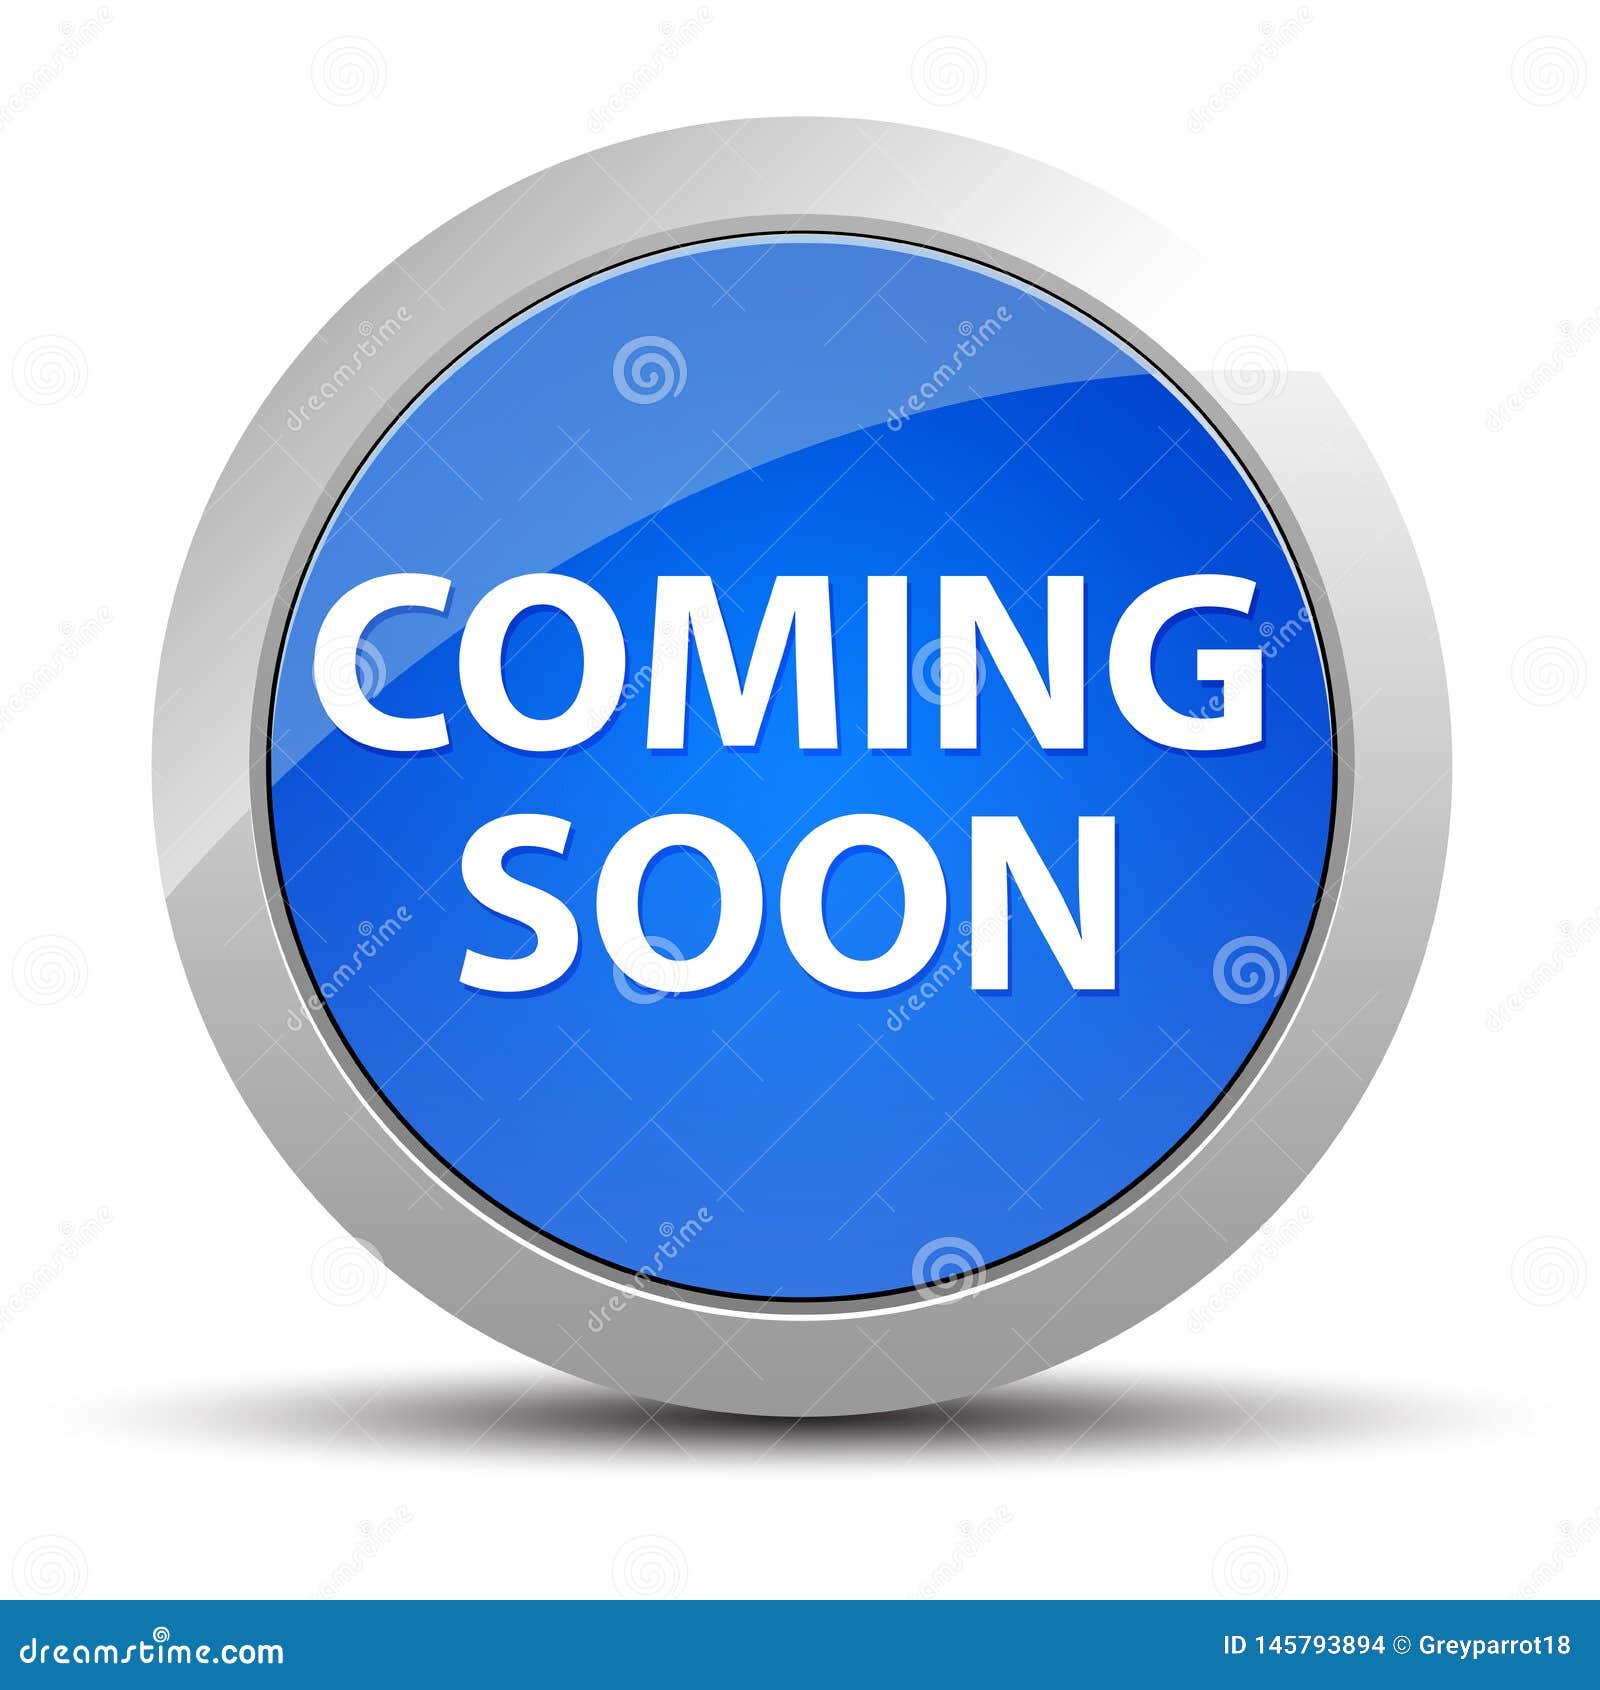 Coming Soon Blue Round Button Stock Illustration Illustration Of